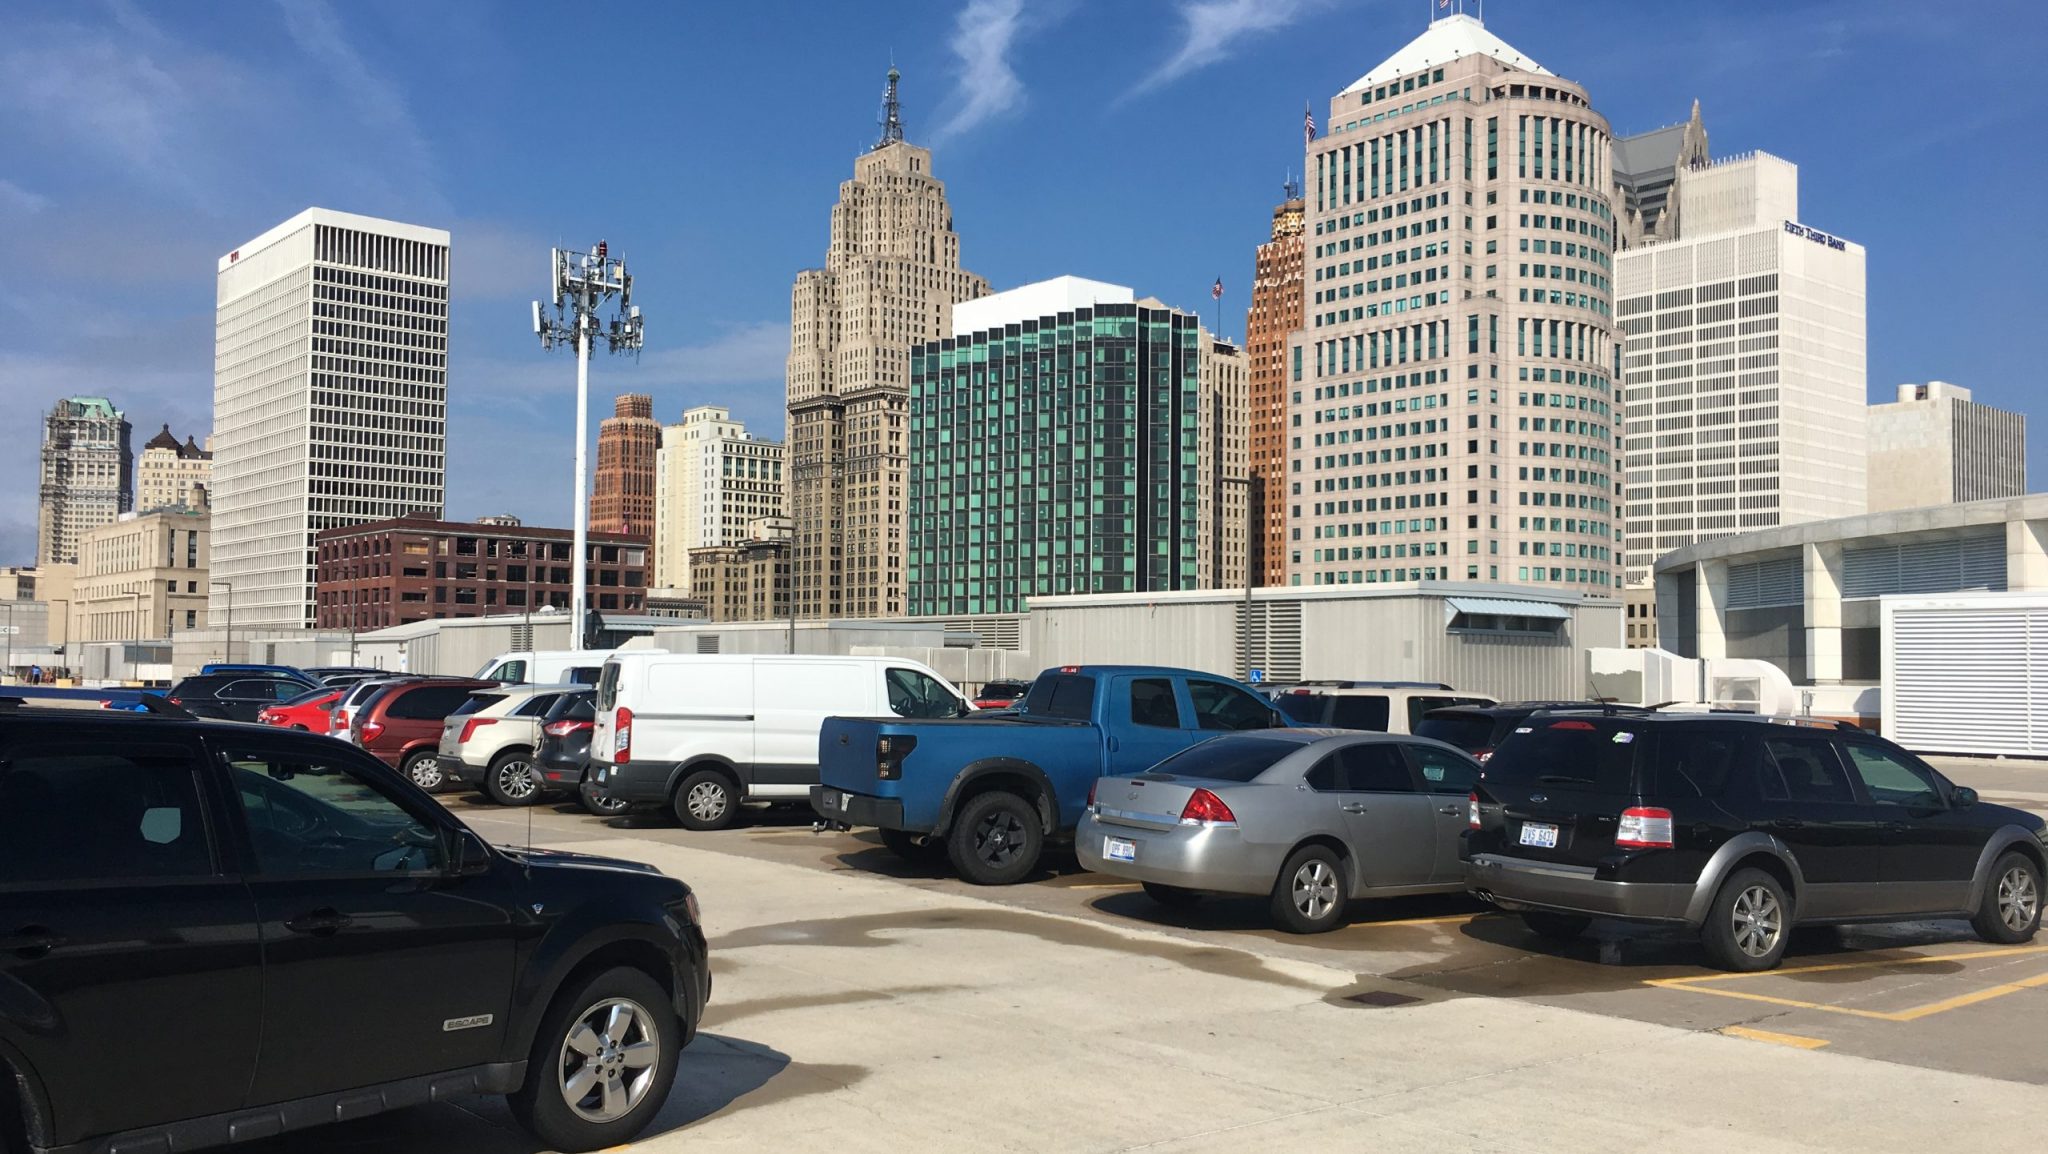 View of downtown Detroit from the parking lot on the roof of the Cobo Center.